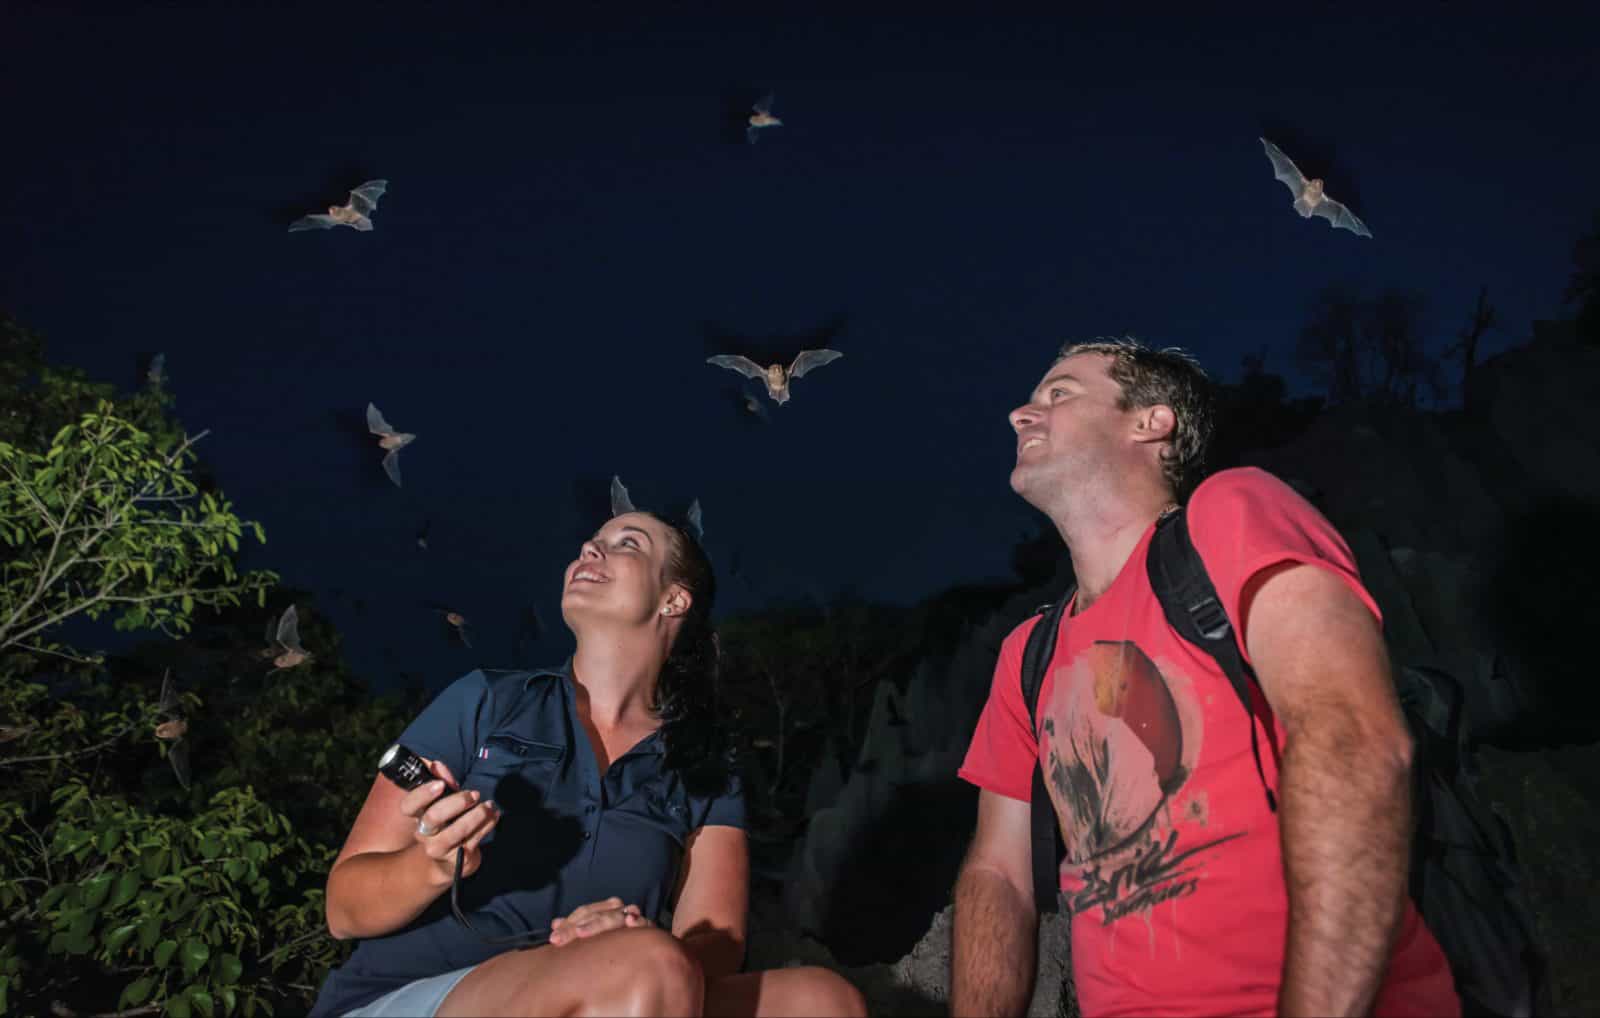 Couple at night surrounded by flying bats/